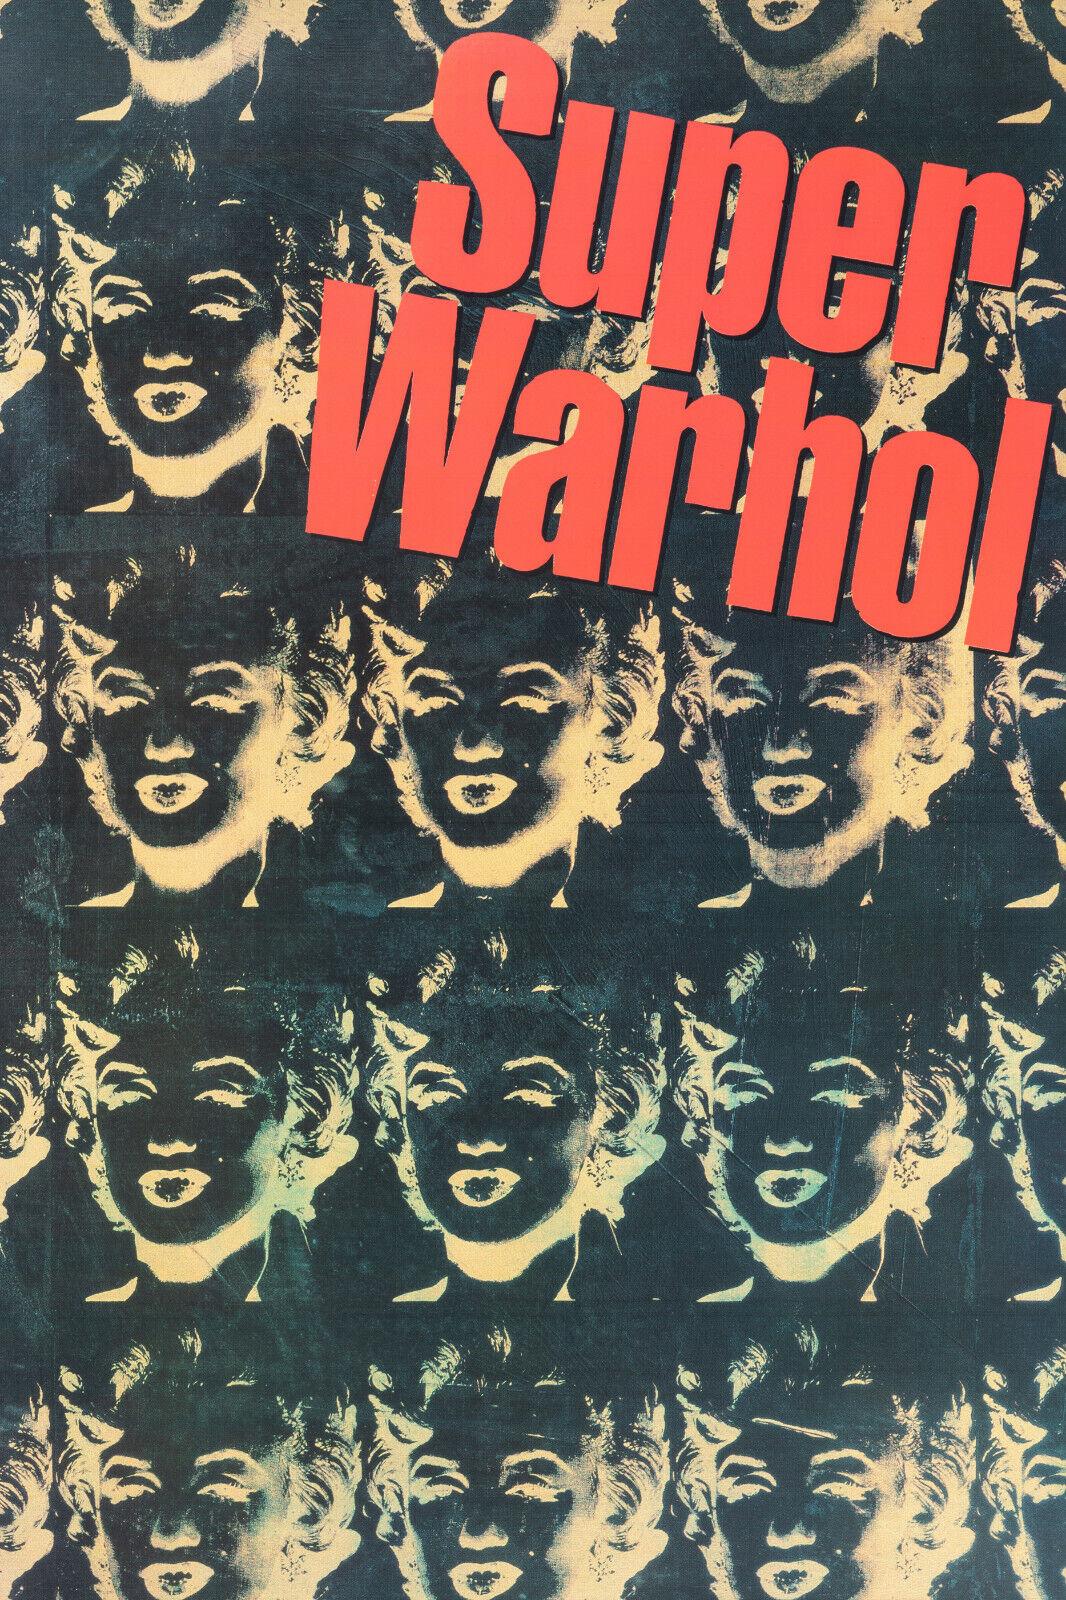 Original Poster-Andy Warhol-Super Warhol-Monaco-Marilyn Monroe, 2003

Advertising poster for the SUPER WARHOL exhibition at the Grimaldi Forum Monaco, from July 16 to August 31, 2003 in Monaco.
The poster uses the famous image of Warhol, 40 GOLD